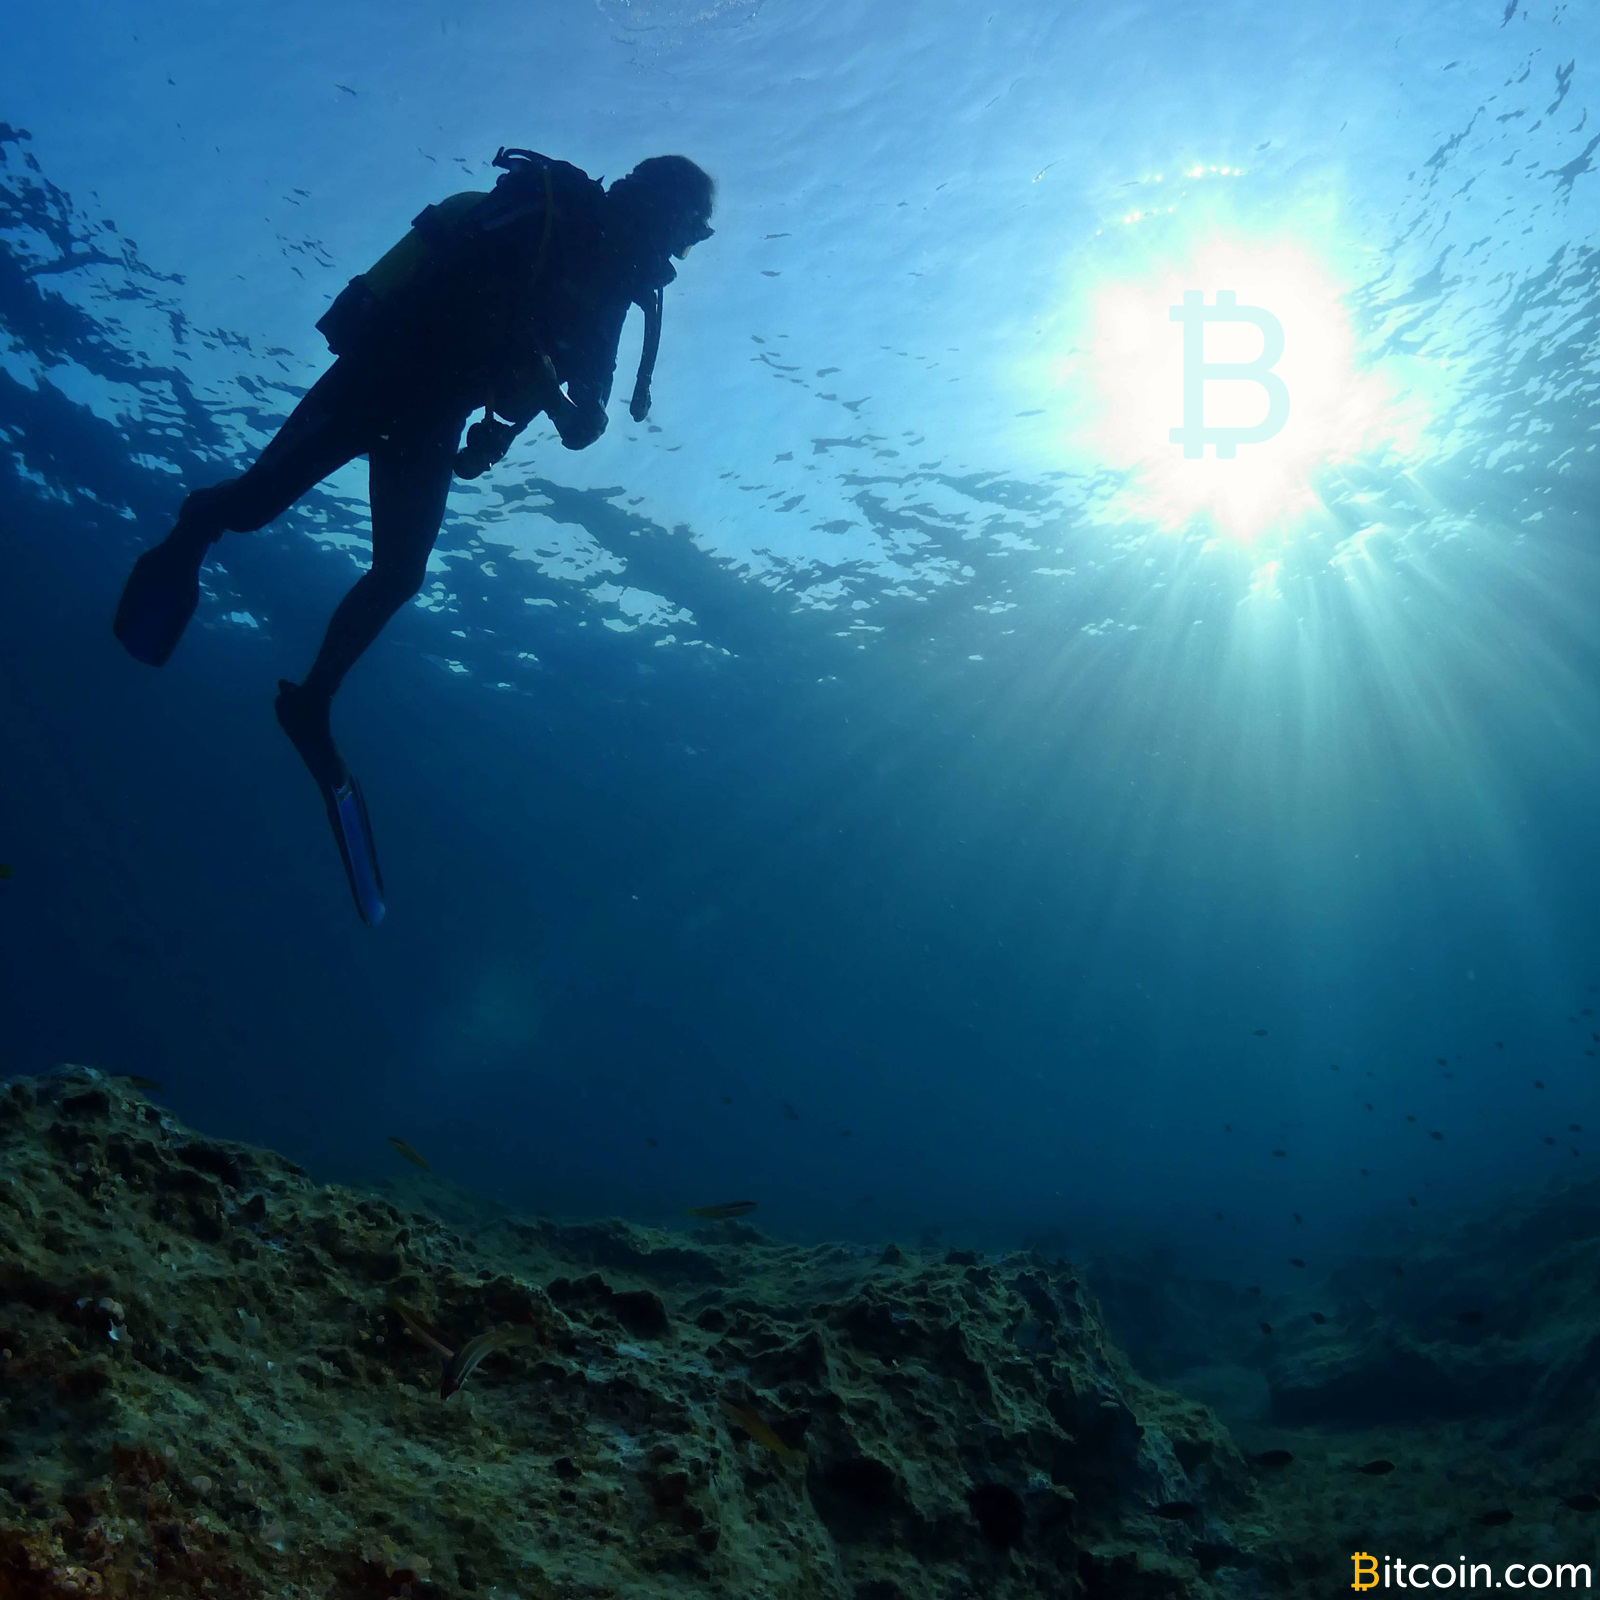 Markets Update: Bitcoin Price Dives Deeper in the Midst of ICO Shakedown